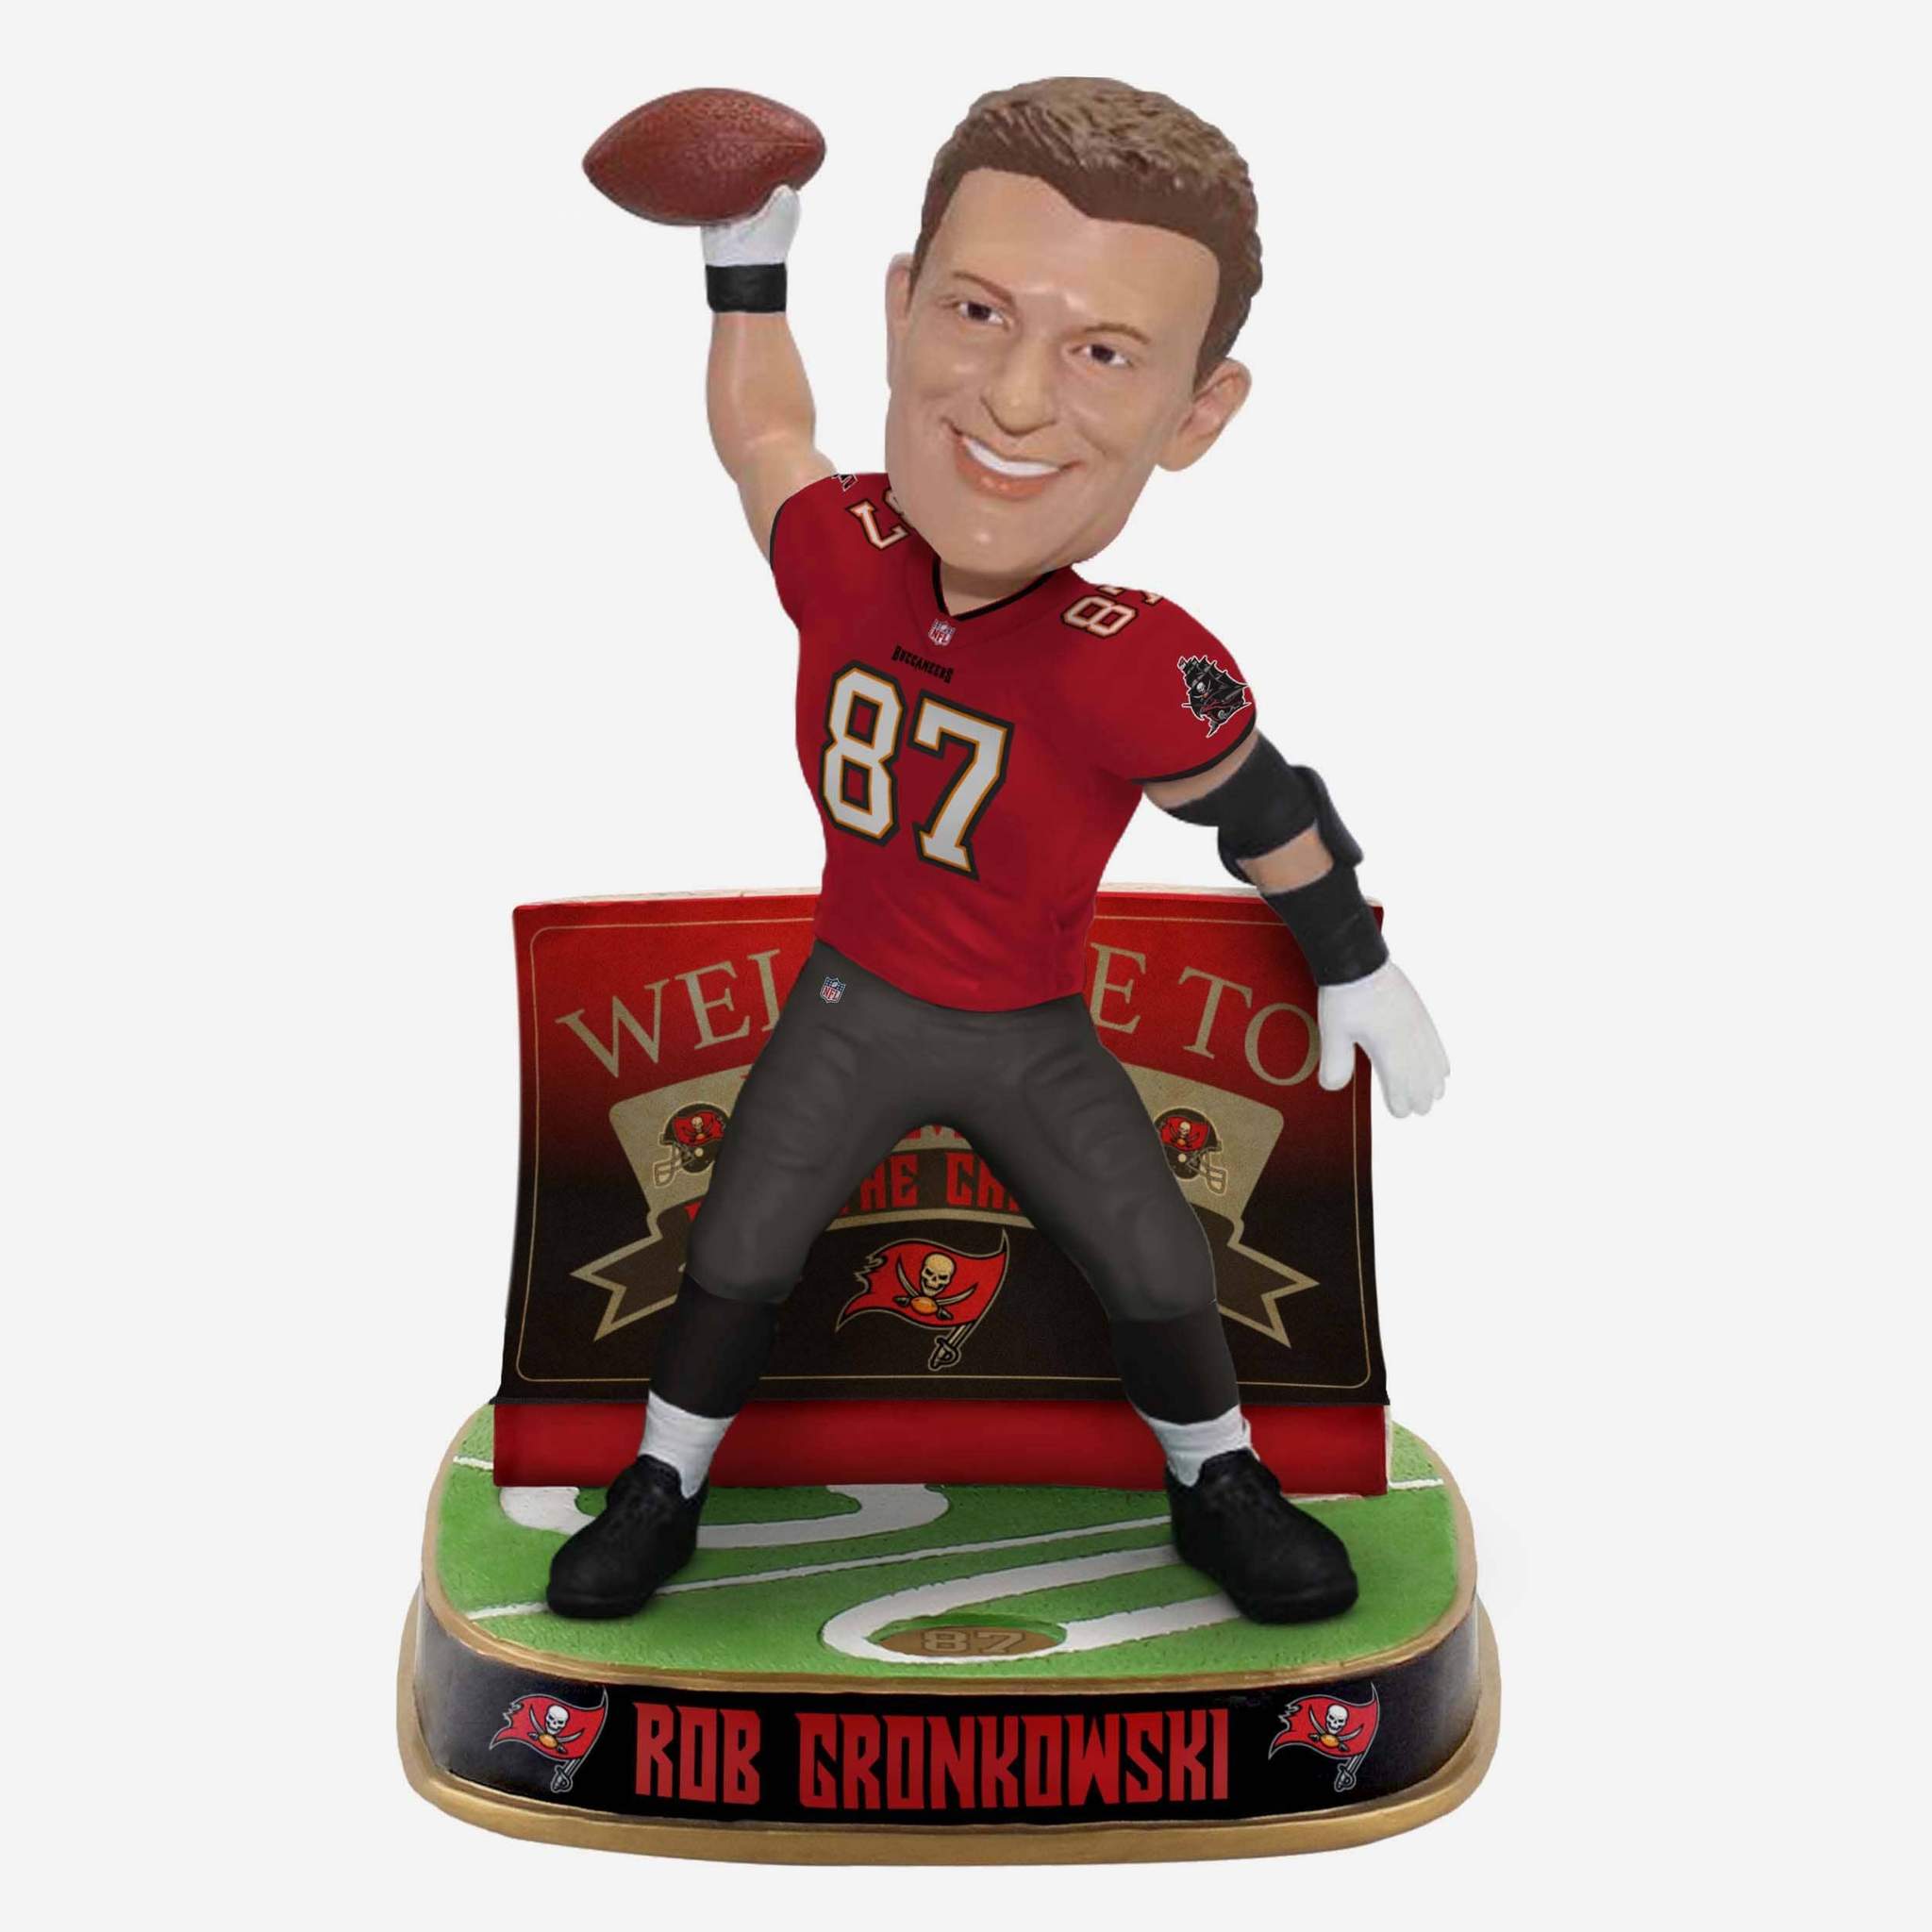 Rob Gronkowski's Tampa Bay Buccaneers bobblehead is available for